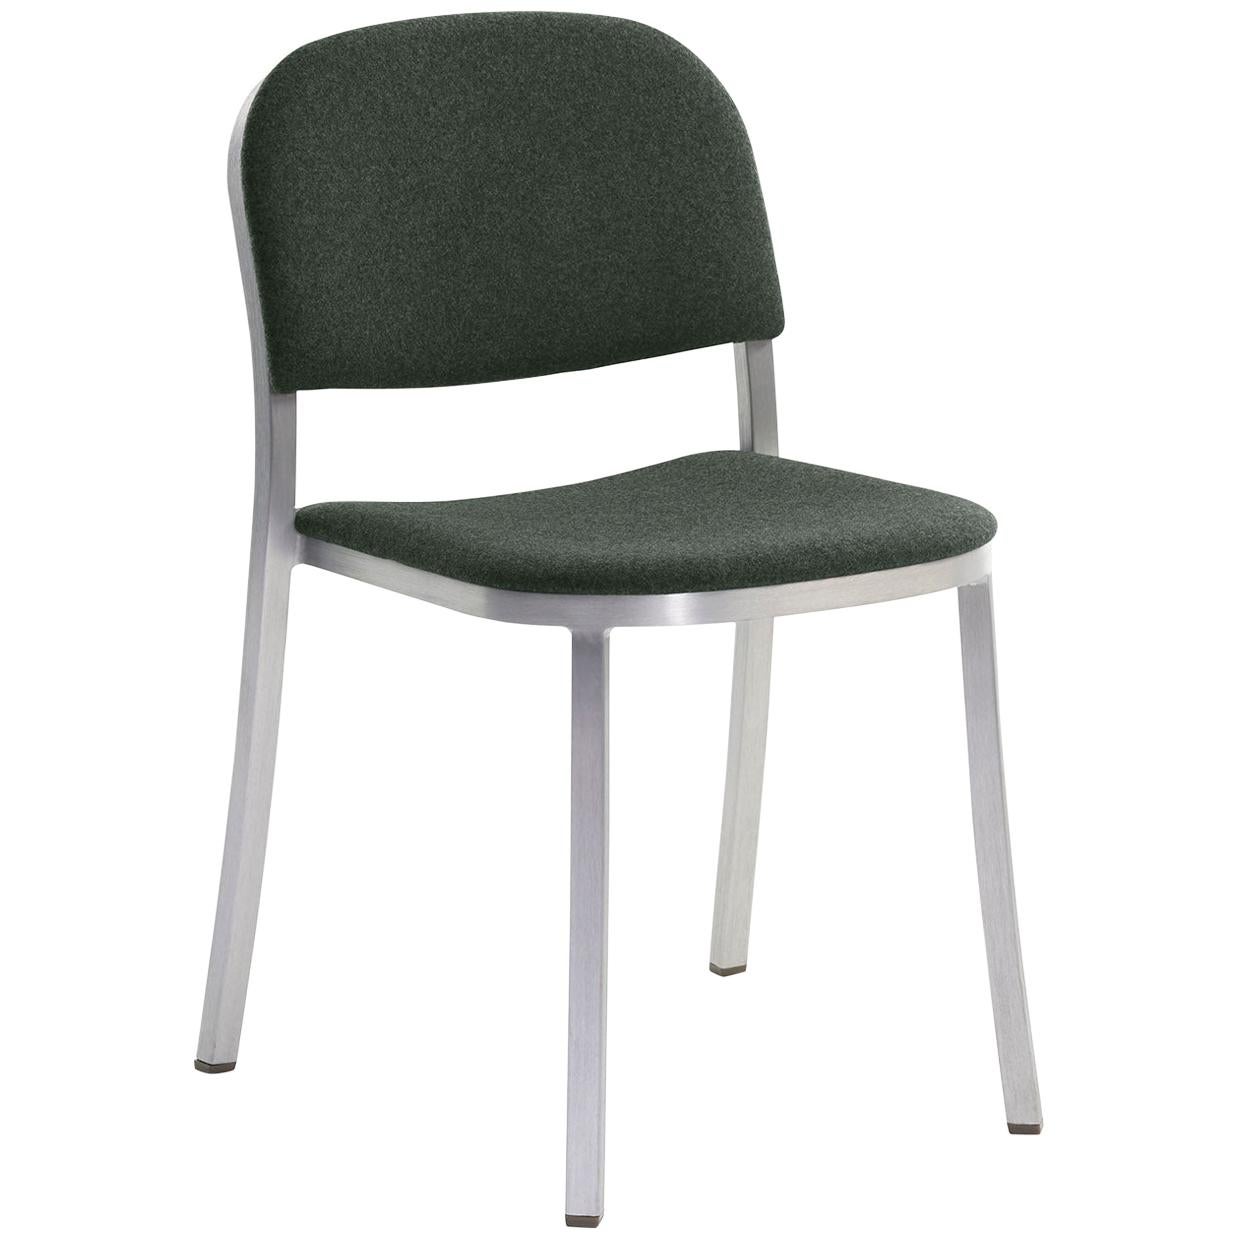 Emeco 1 Inch Stacking Chair with Aluminum Legs & Green Fabric by Jasper Morrison